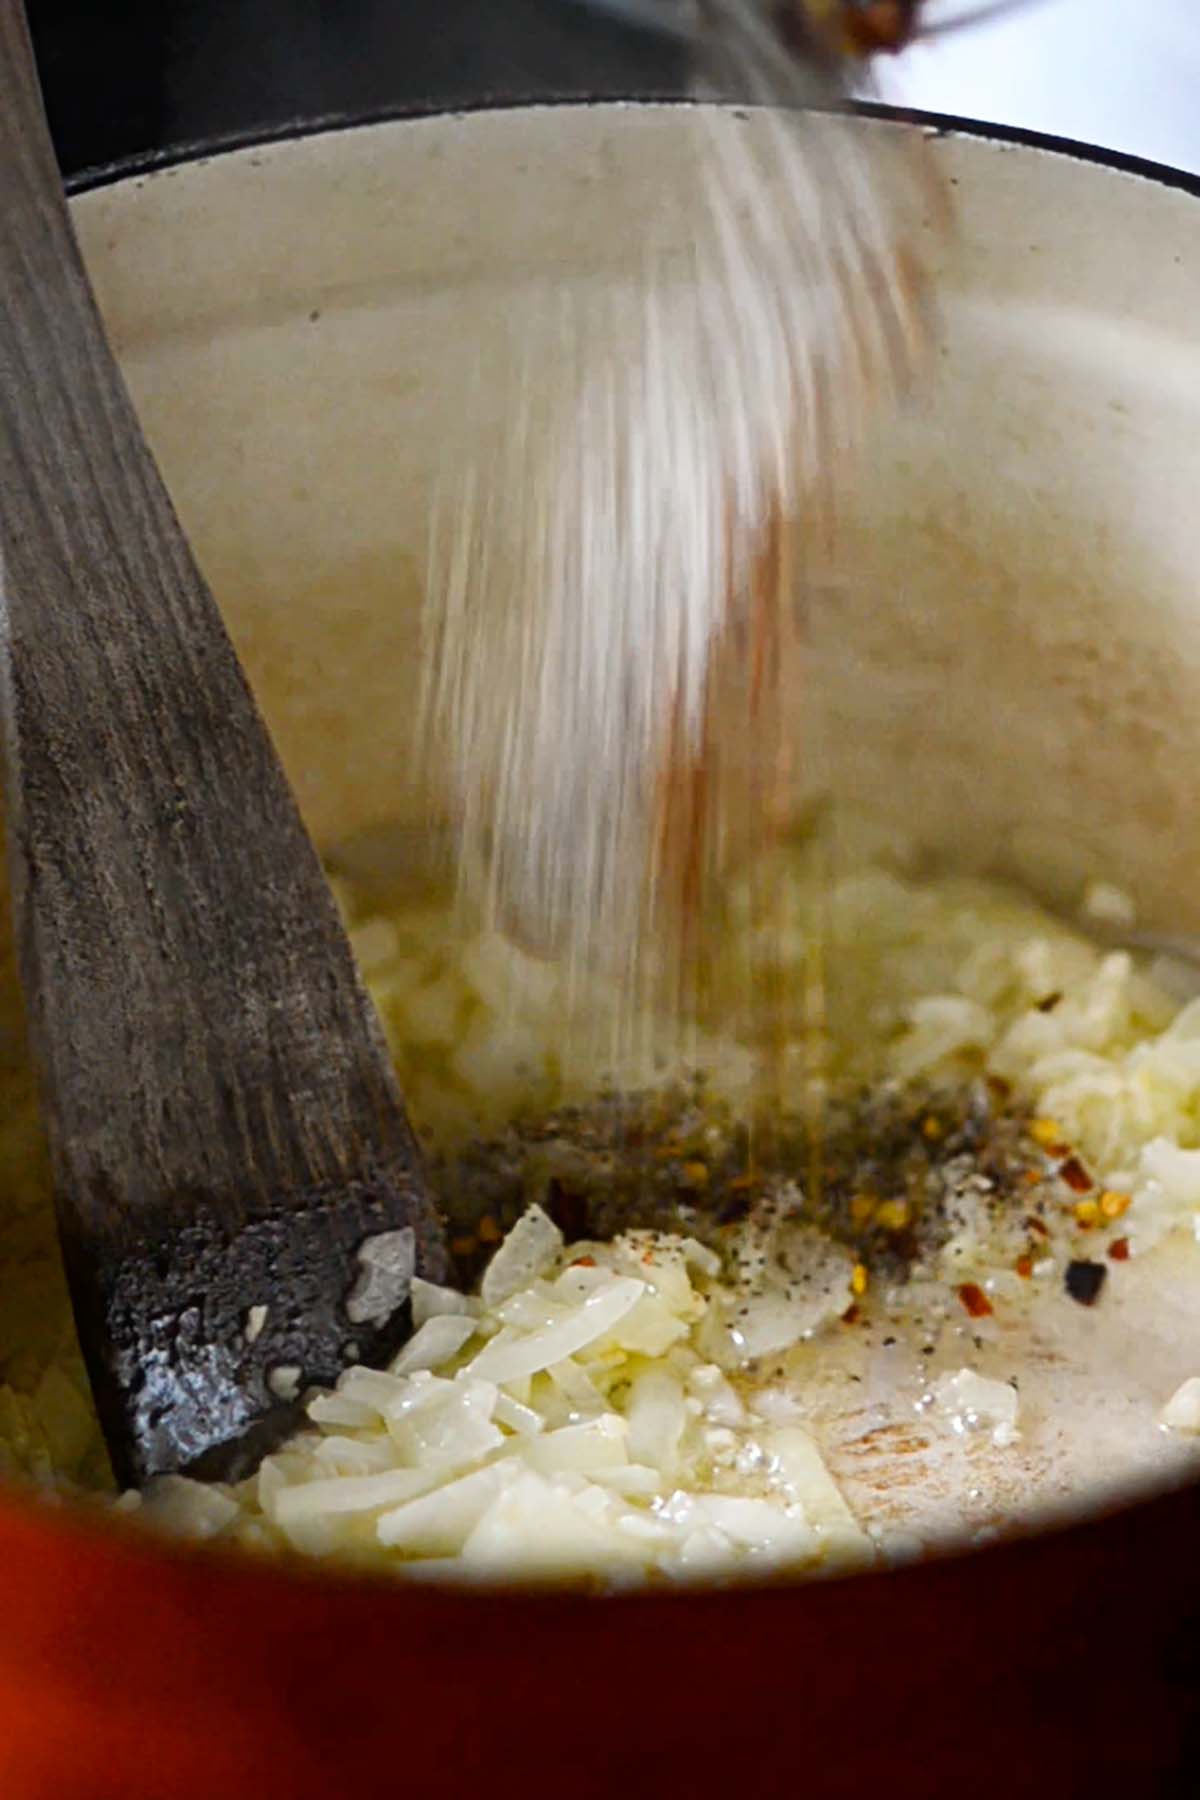 Herbs and spices are added to sautéd onions.